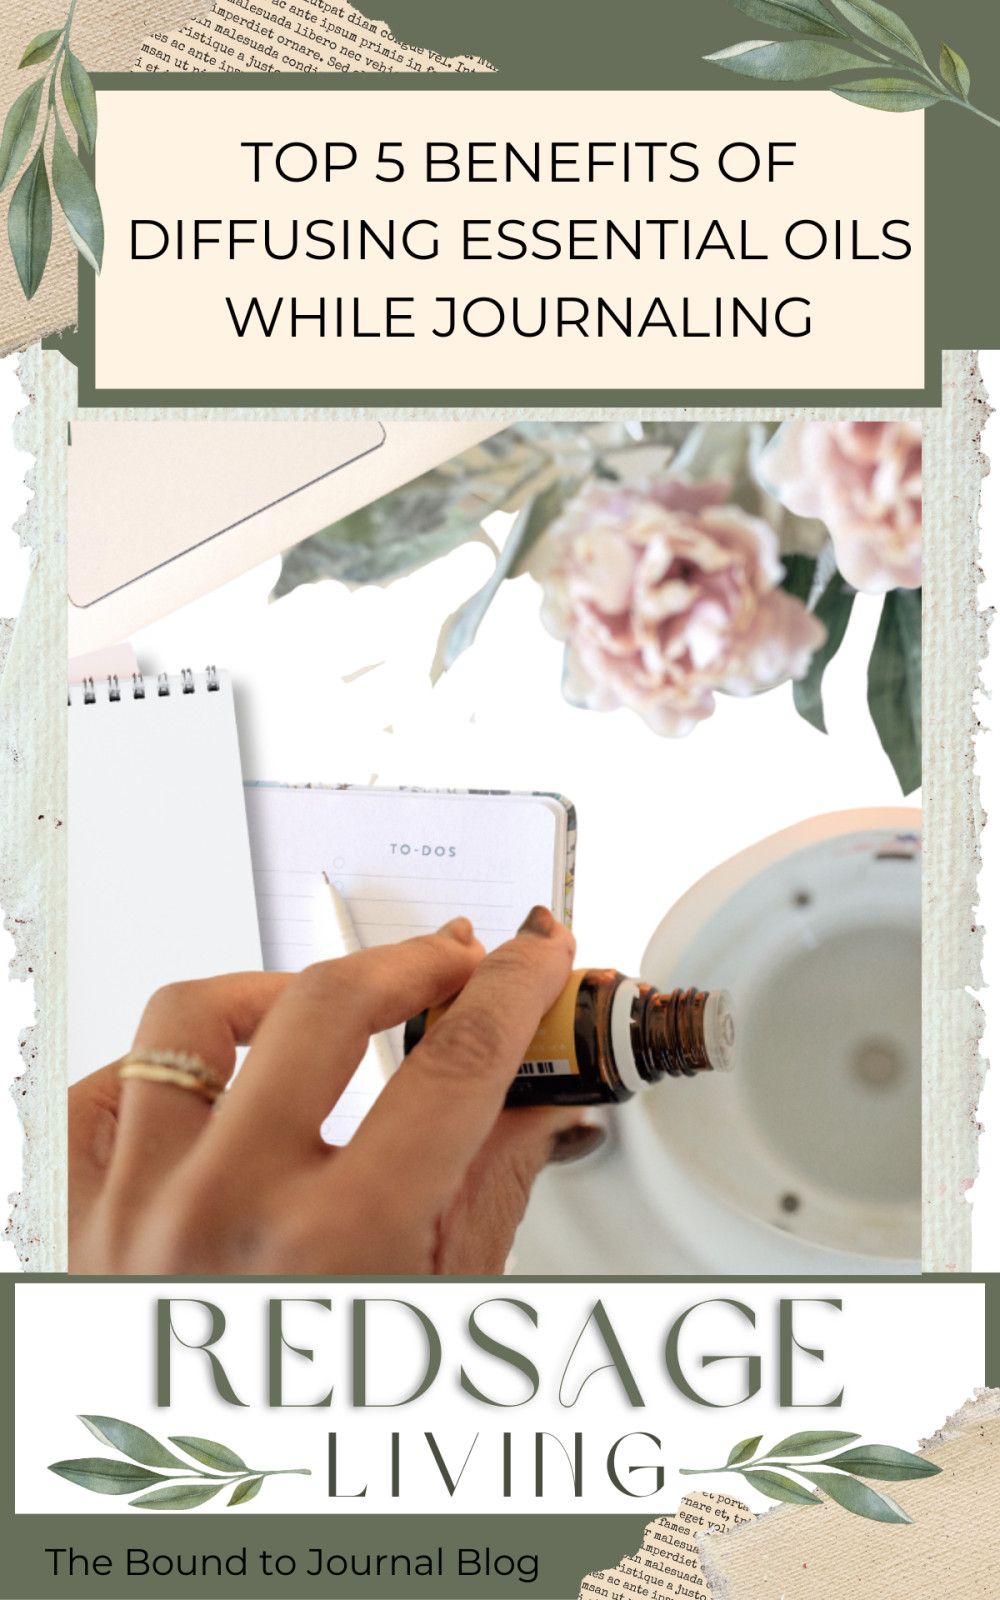 Top 5 Benefits of Diffusing Essential Oils While Journaling